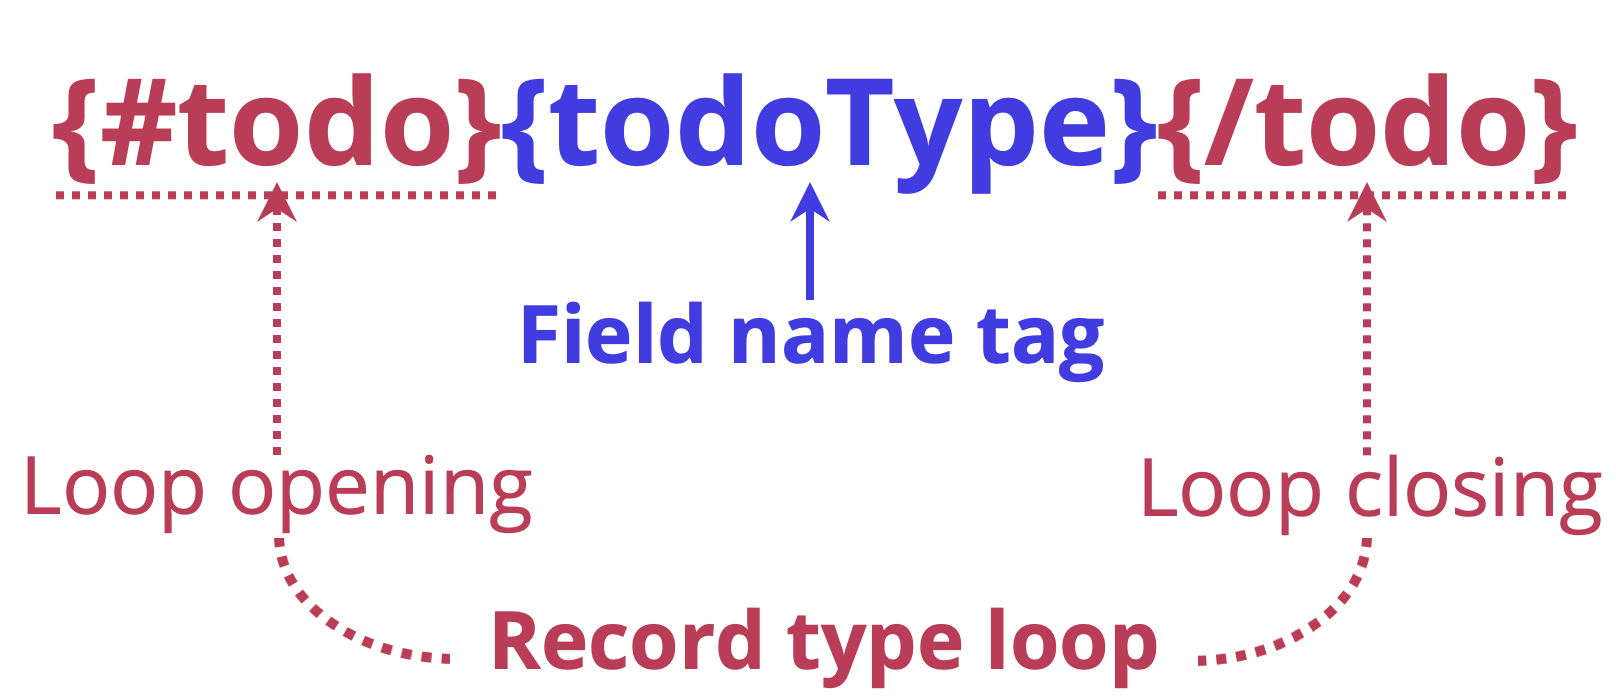 Reads "{#todo}{todoType}{/todo}". {#todo} is labelled as the loop opening and {/todo} is the loop closing. Both components are labelled as the "Record Type Loop". "{todoType} is labelled as the Field name tag.